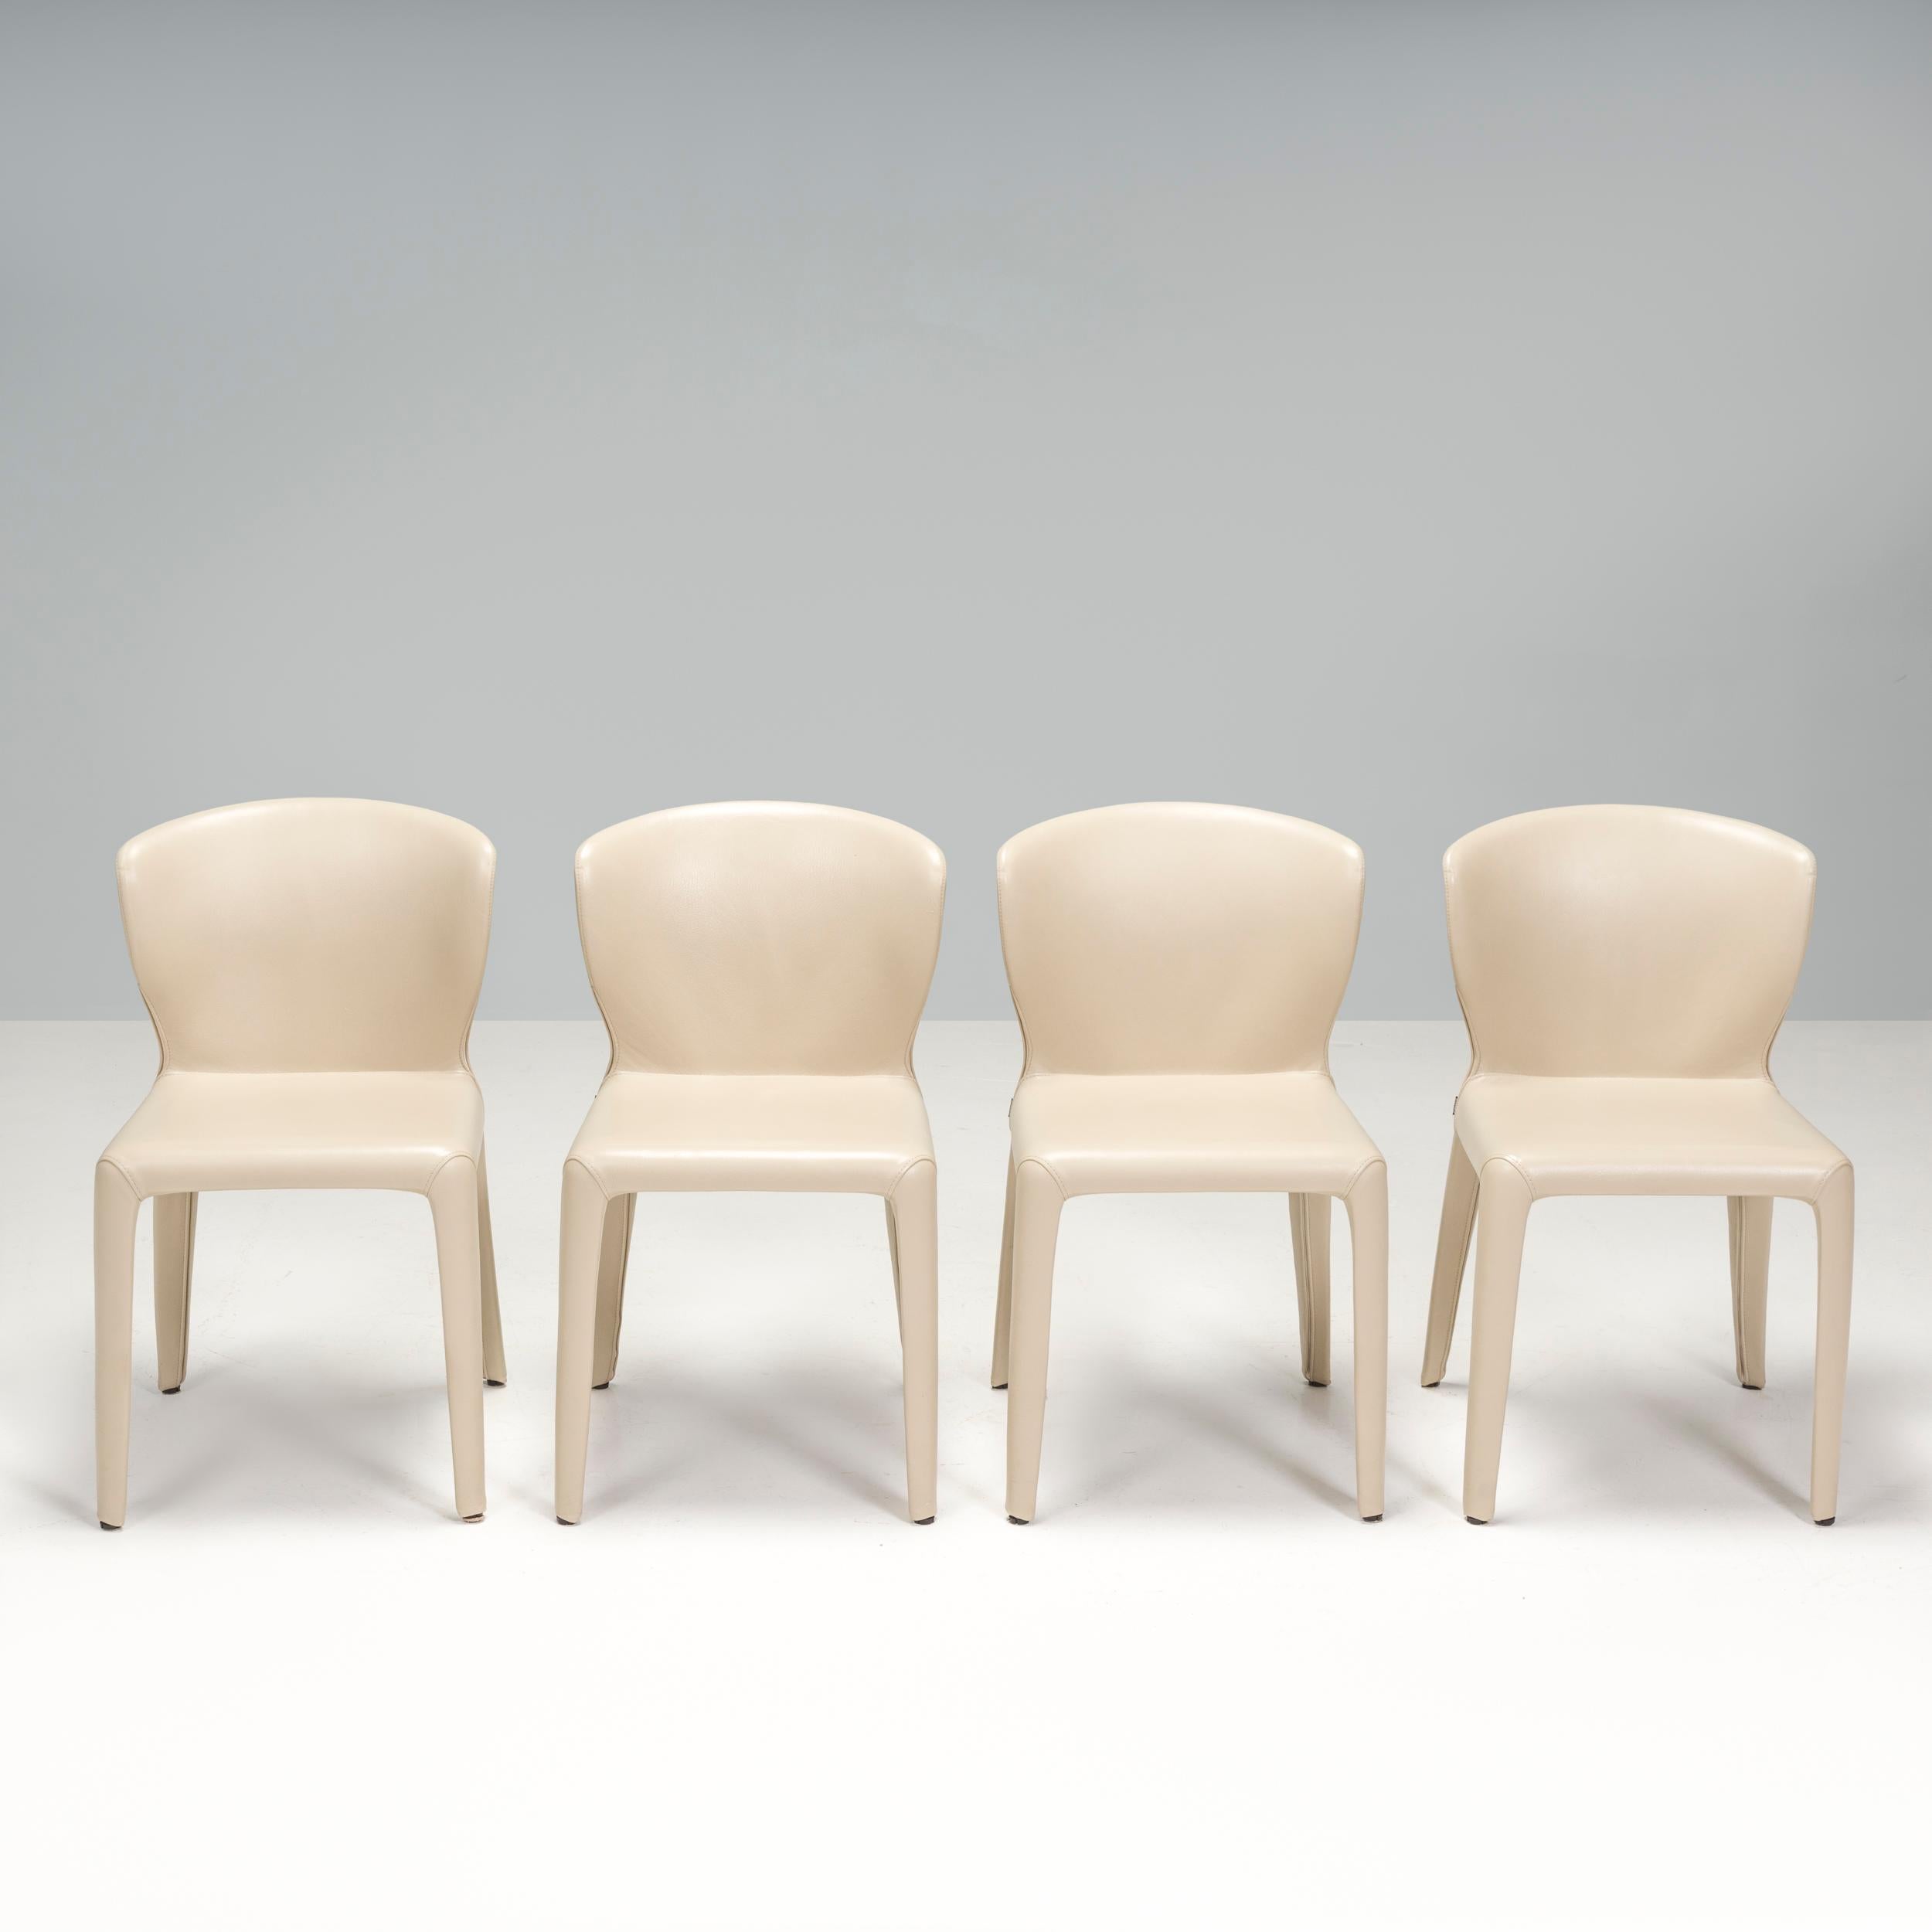 Designed by Hannes Wettstein for Cassina in 2003, these 367 Hola dining chairs have a sleek, contemporary silhouette.
 
The set of four chairs are in excellent condition and are fully upholstered in cream leather.
 
Featuring a curved wingback, the